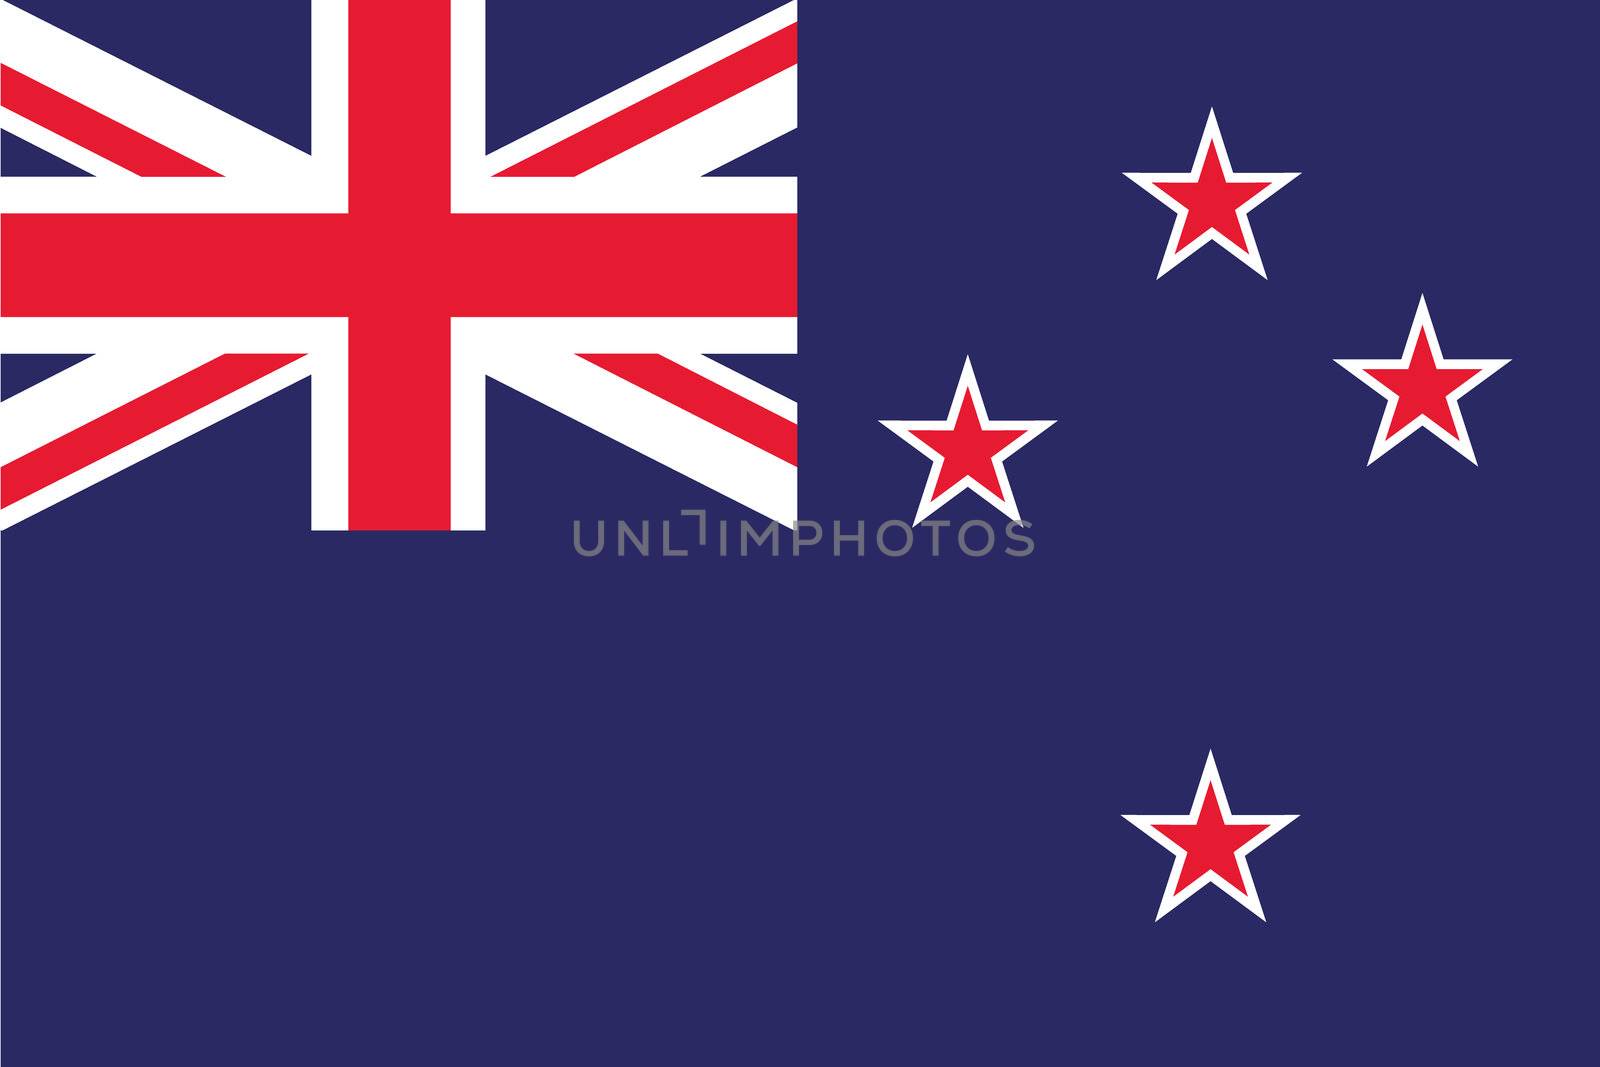 An illustration of the flag of New Zealand